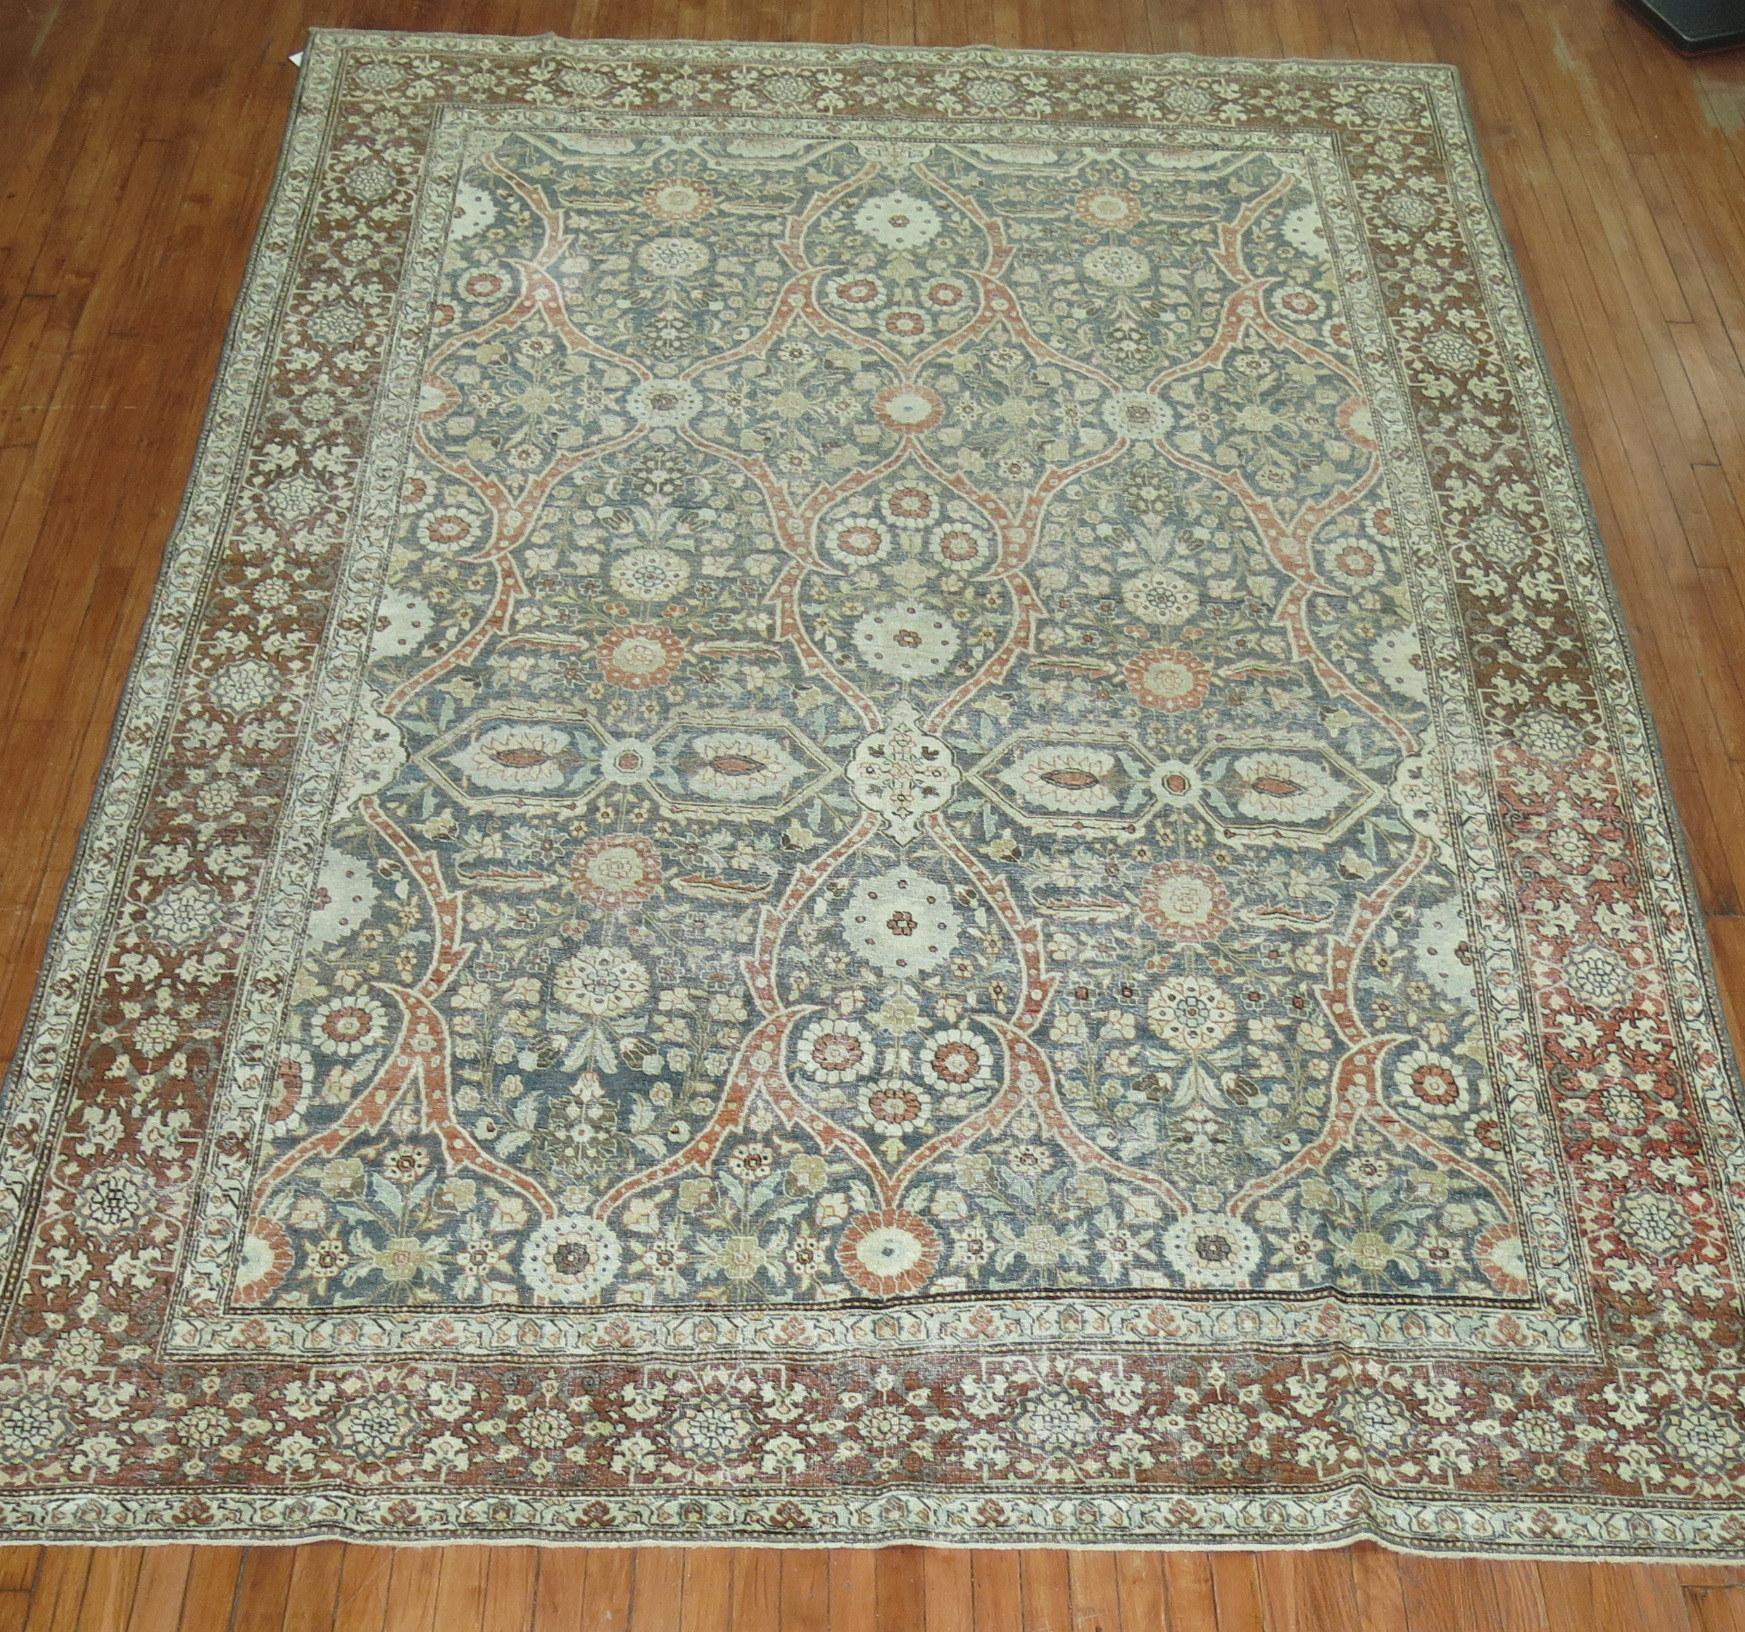 An early 20th century highly decorative Persian Tabriz rug 

Measures: 8'1'' x 11'4''